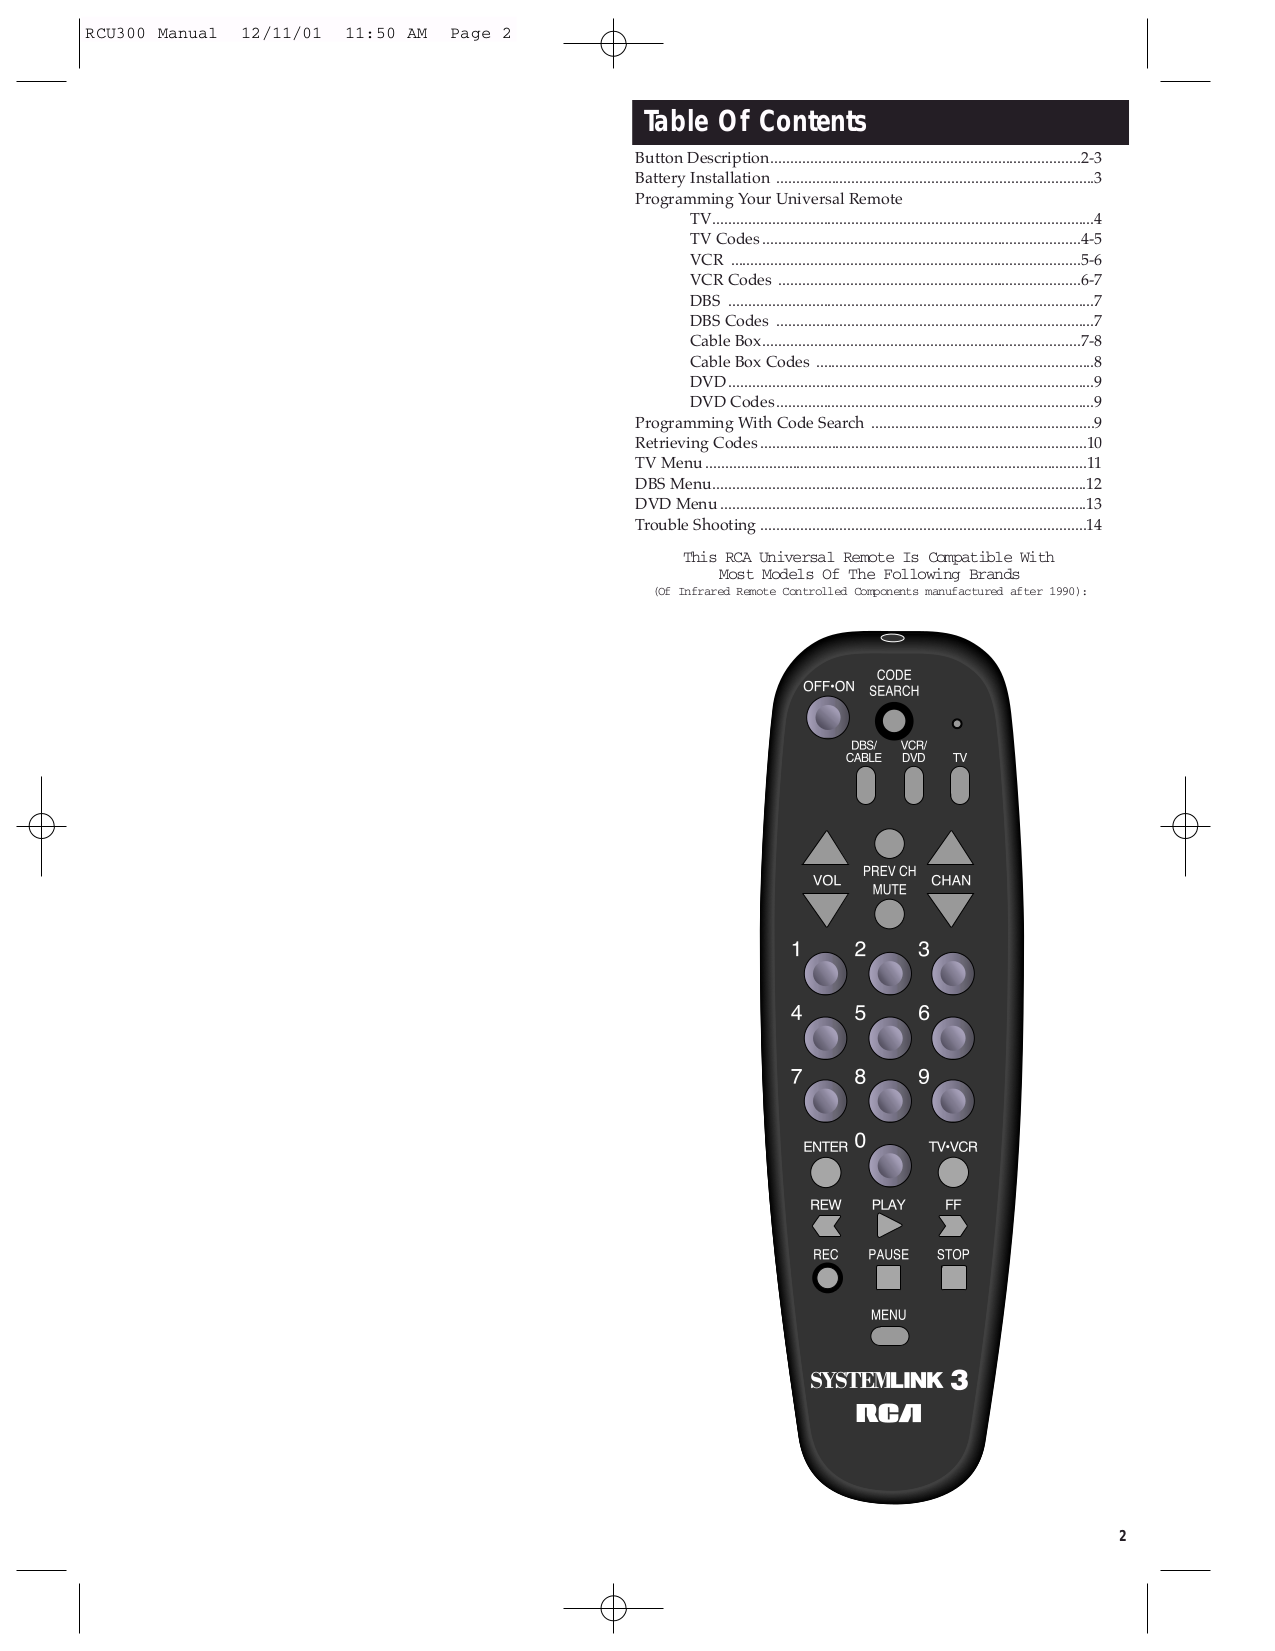 Directions To Program Philips Universal Remote